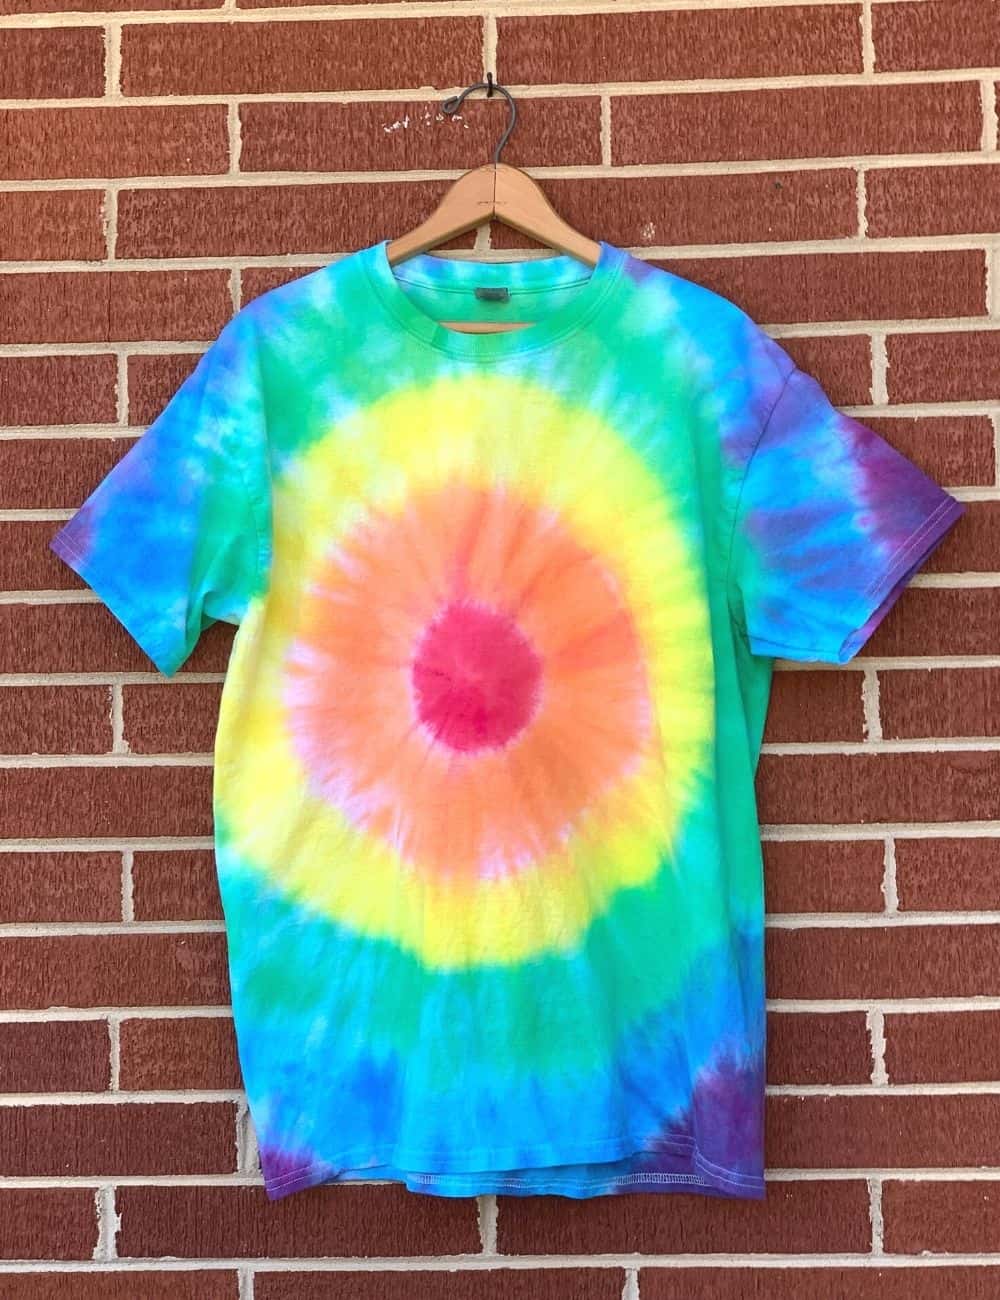 Tie Dye Bullseye How To Make The Classic Tie Dye Pattern Chaotically